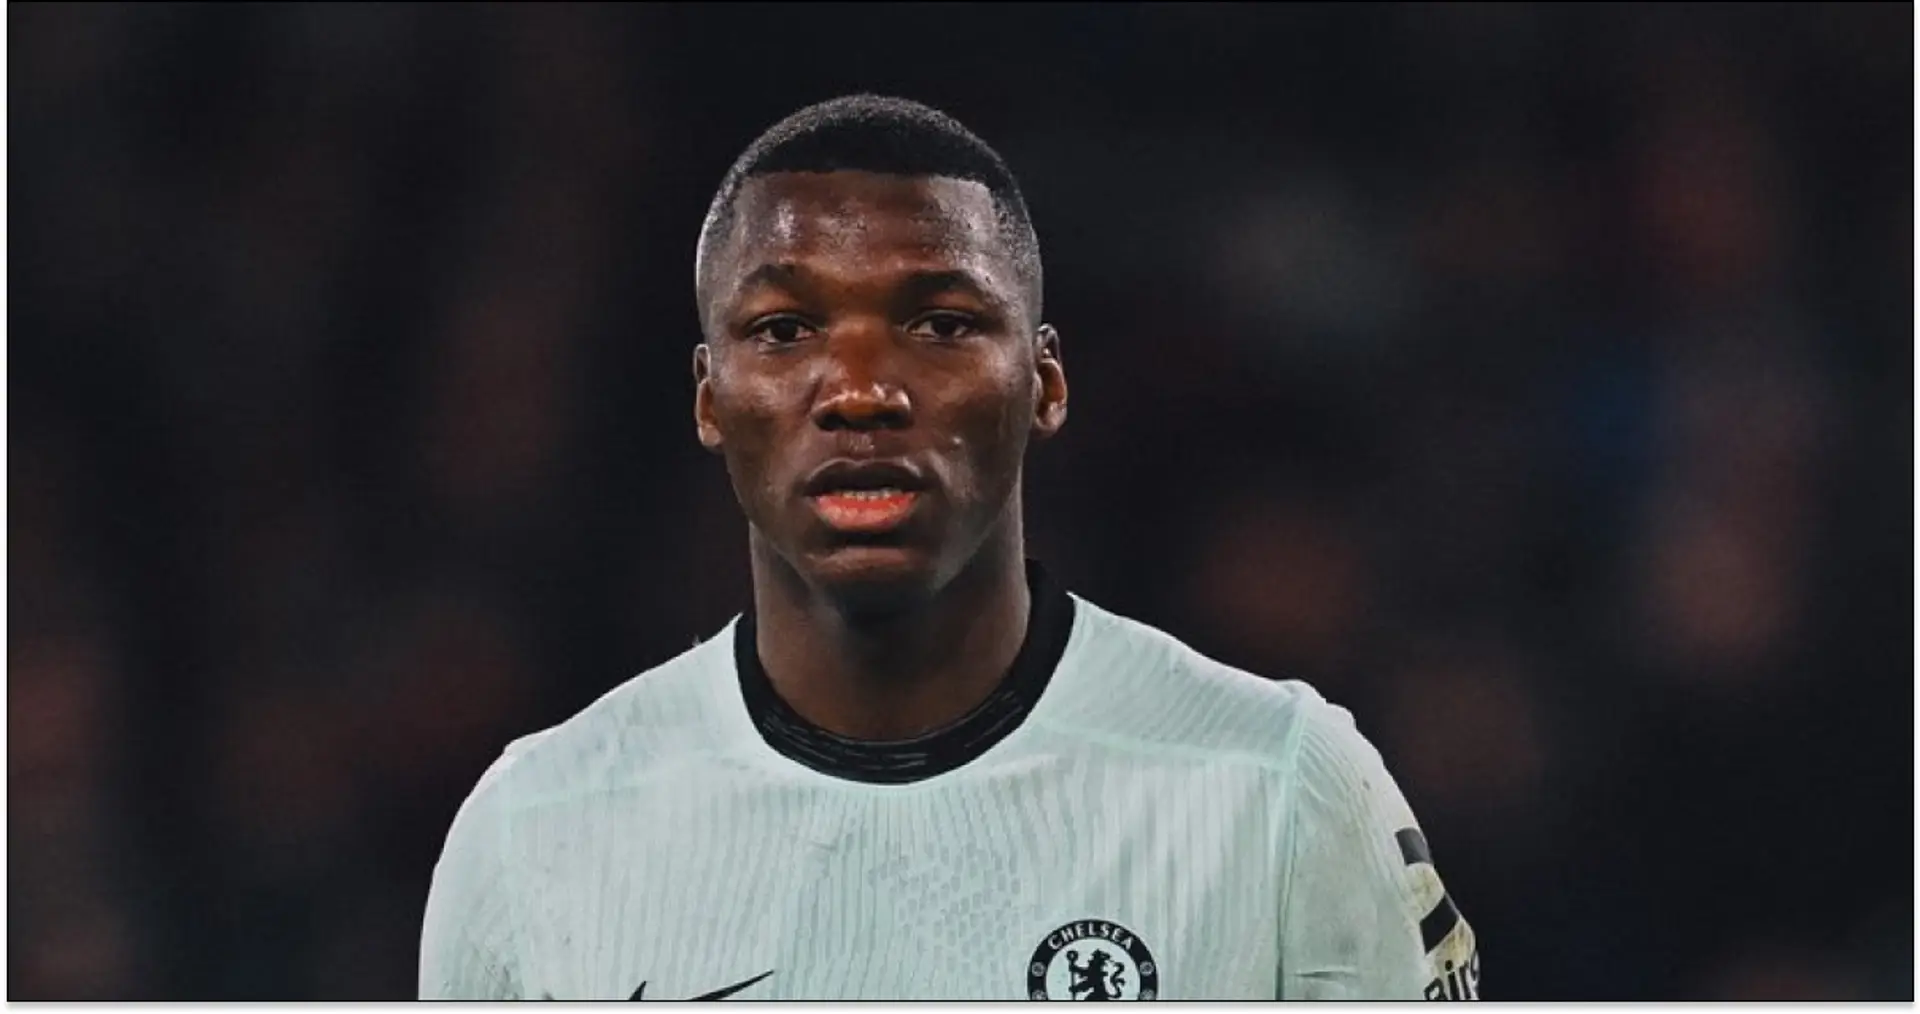 'Hull won't start Caicedo over Tyler Morton': Liverpool fans react after £115m Chelsea man drops another disasterclass